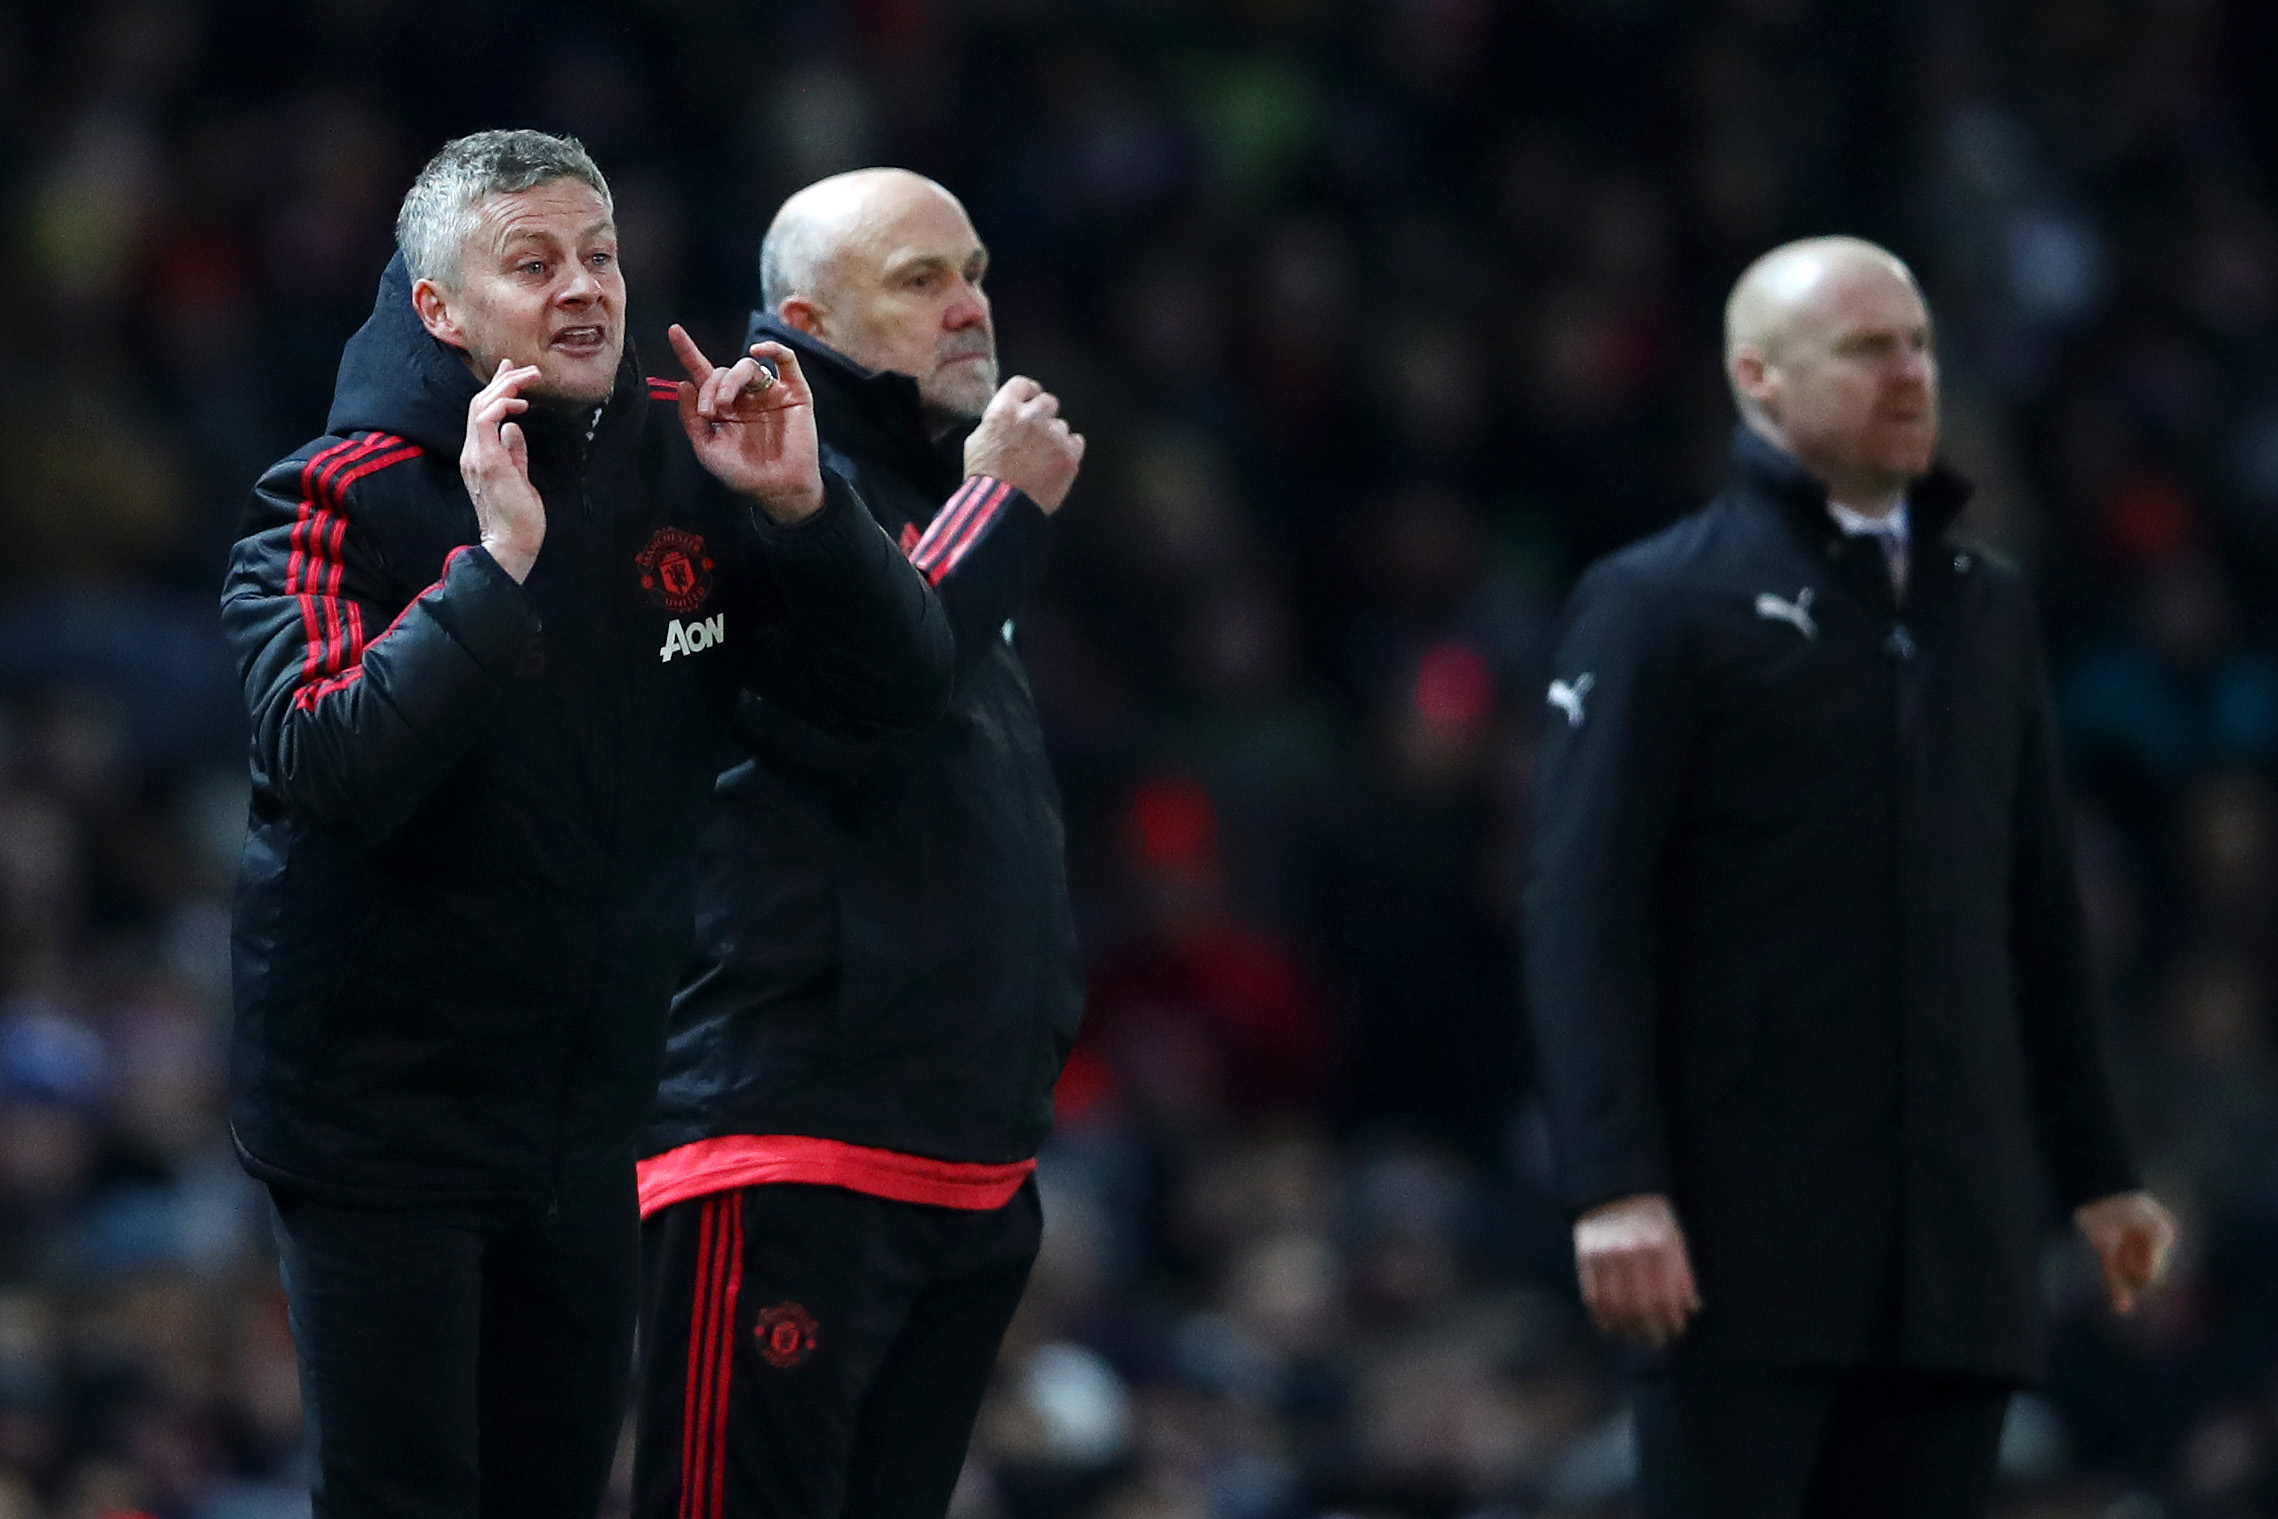 MANCHESTER, ENGLAND - JANUARY 29:  Ole Gunnar Solskjaer, Interim Manager of Manchester United gives his team instructions during the Premier League match between Manchester United and Burnley at Old Trafford on January 29, 2019 in Manchester, United Kingdom.  (Photo by Clive Brunskill/Getty Images)